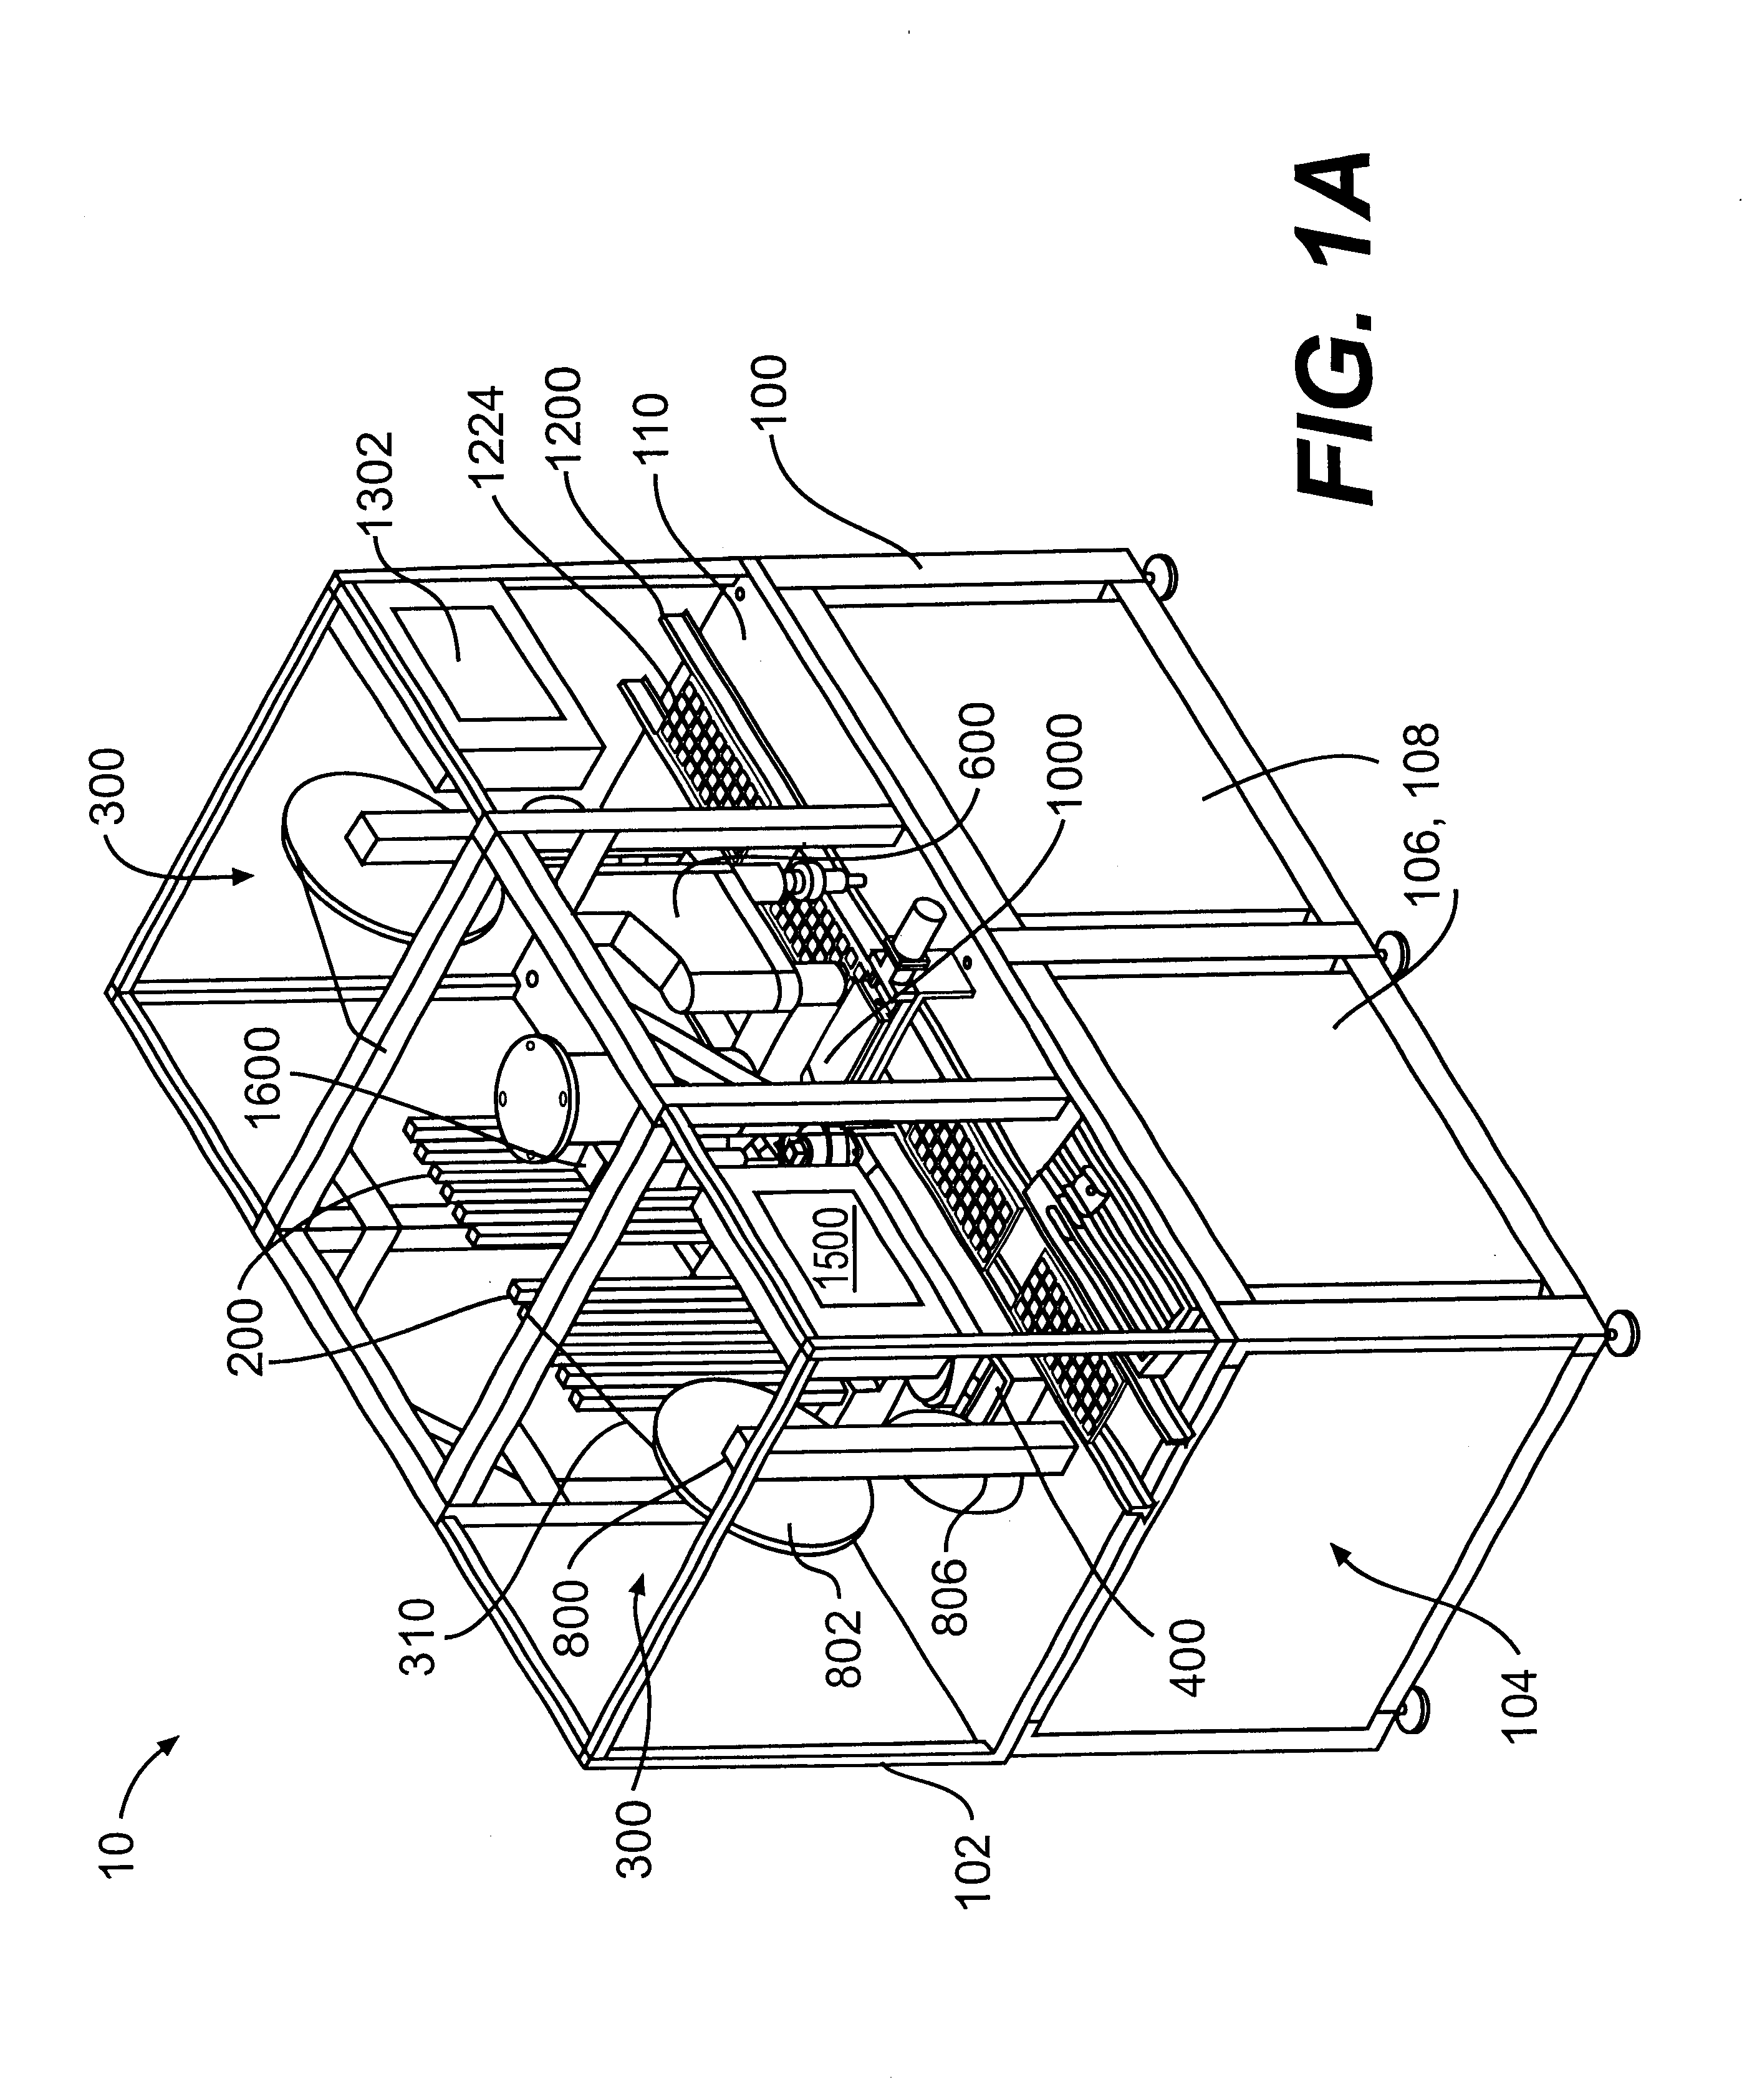 Apparatus for and method of manufacturing a semiconductor die carrier